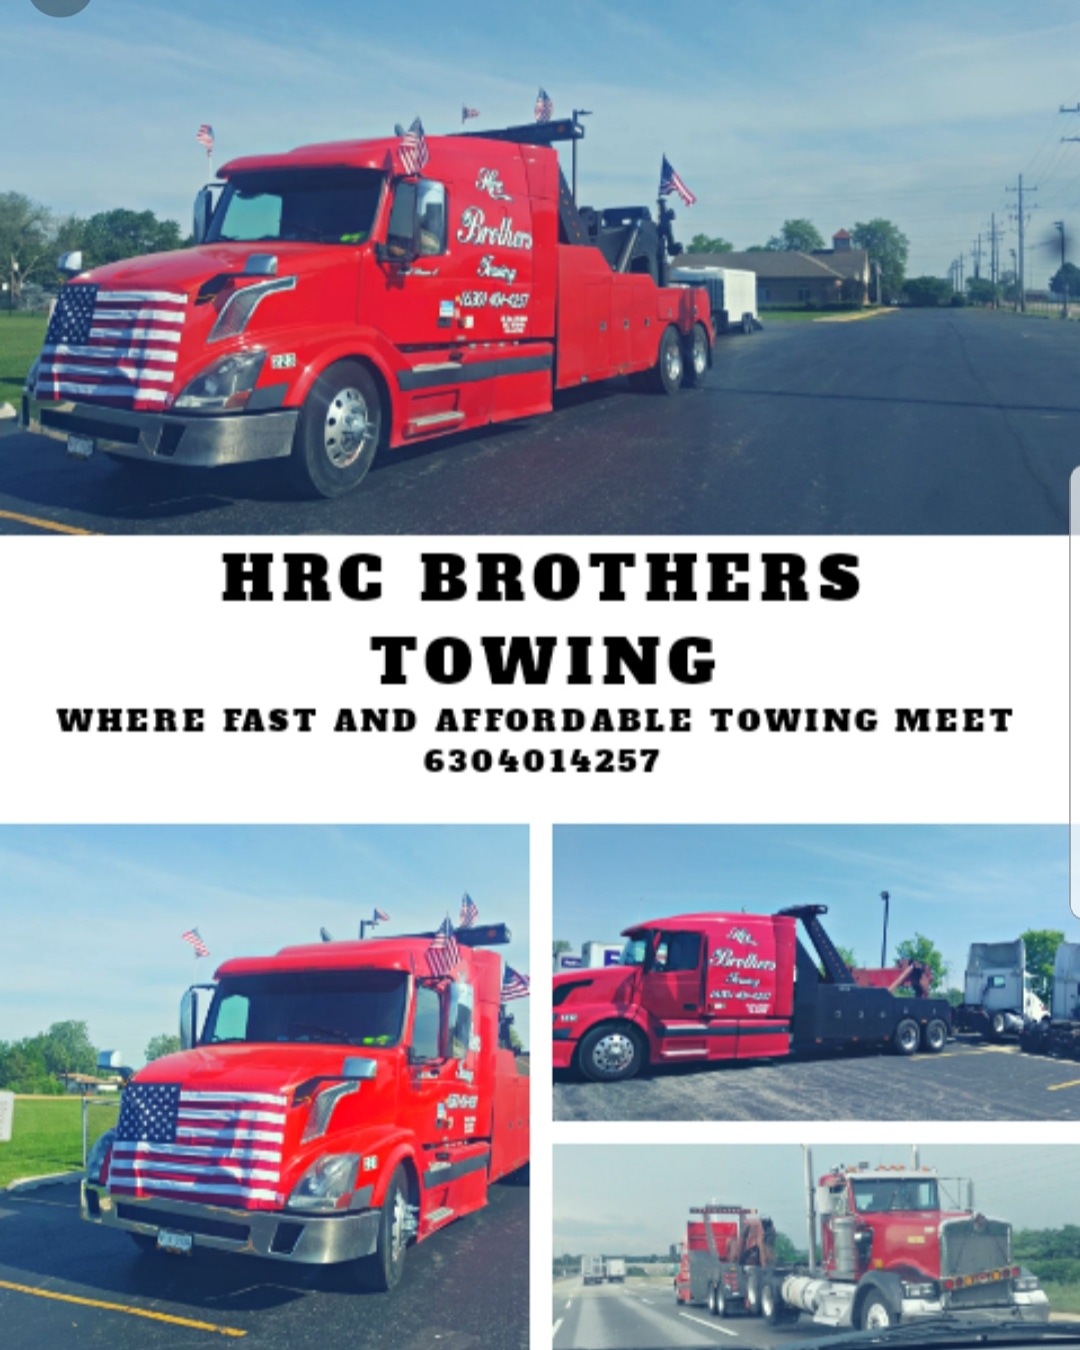 HRC Brothers Towing Photo